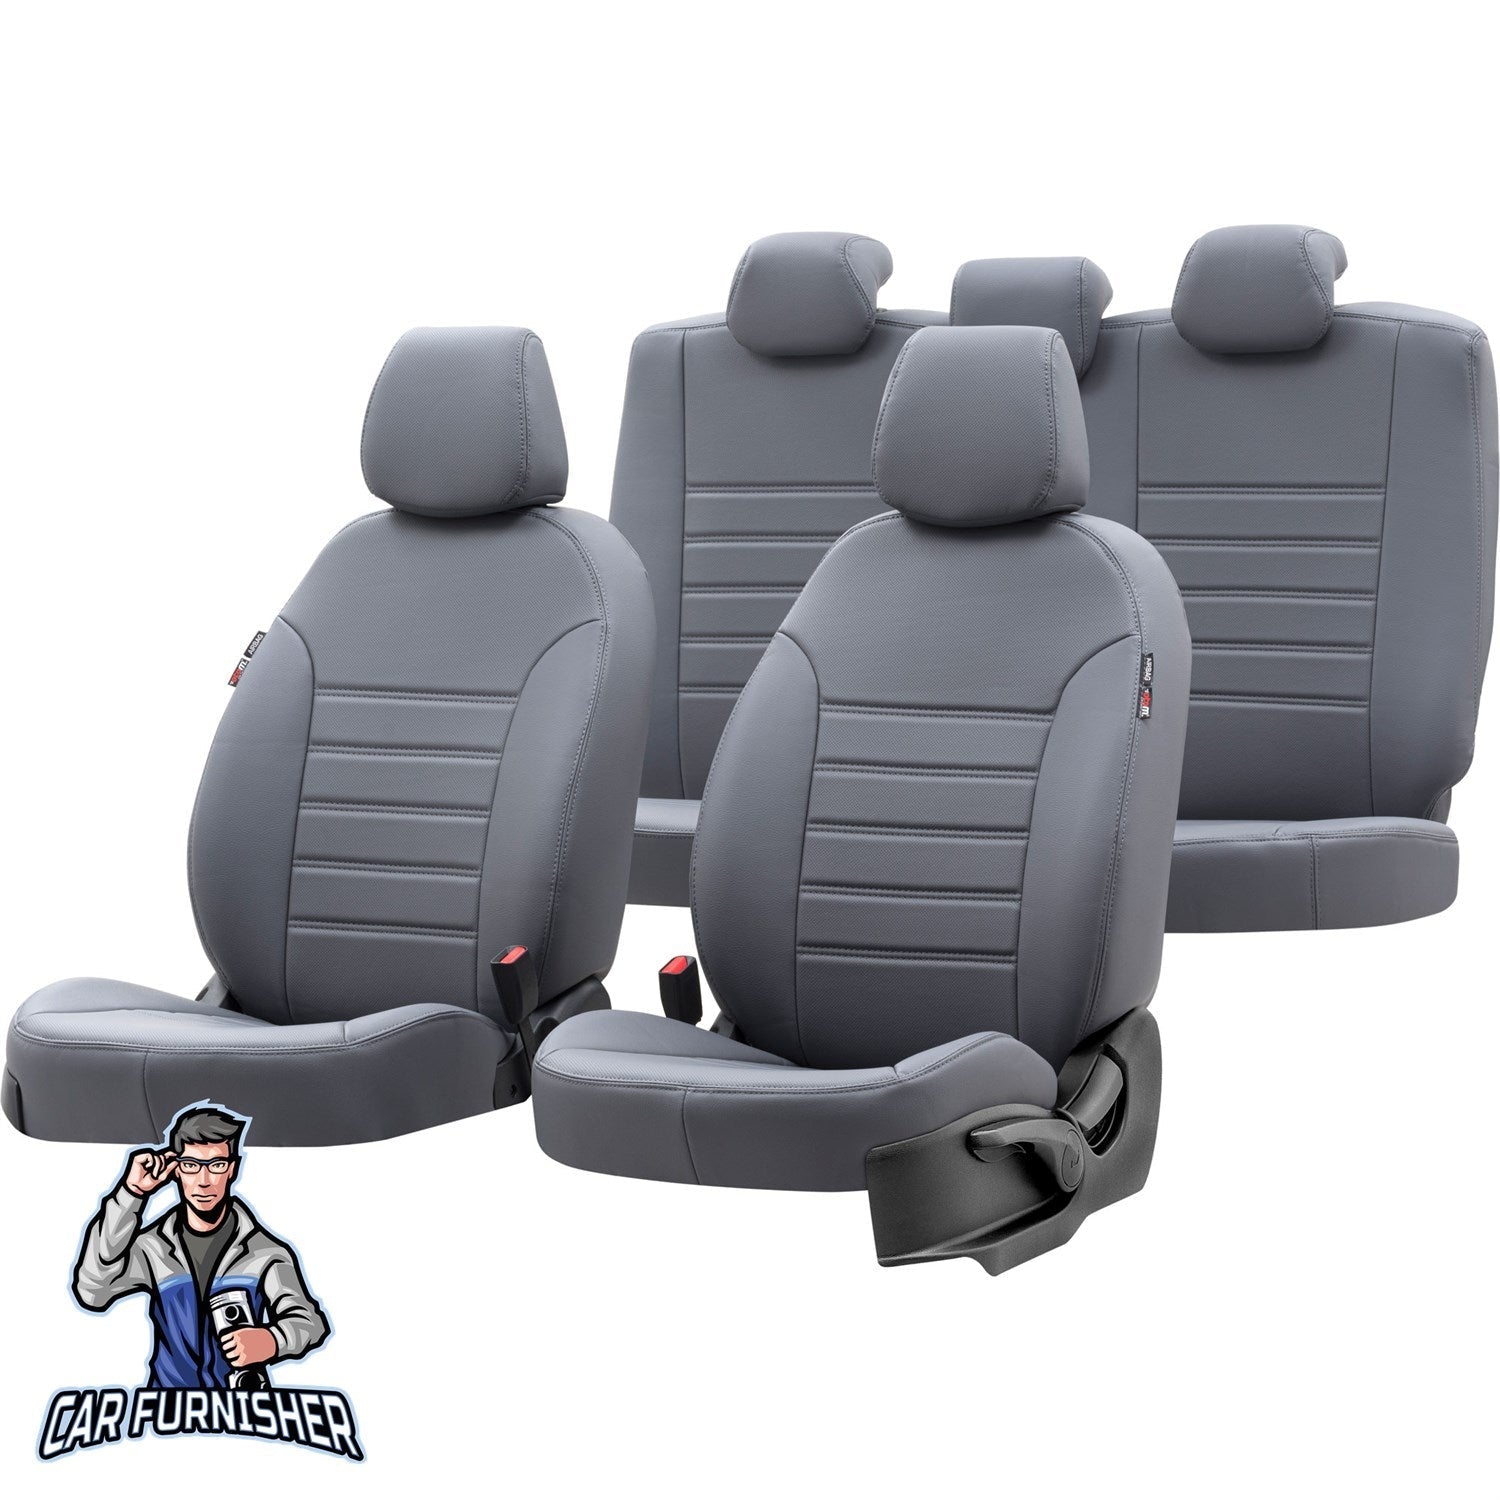 Peugeot 206 Car Seat Covers 1999-2012 Istanbul Design Smoked Full Set (5 Seats + Handrest) Leather & Fabric